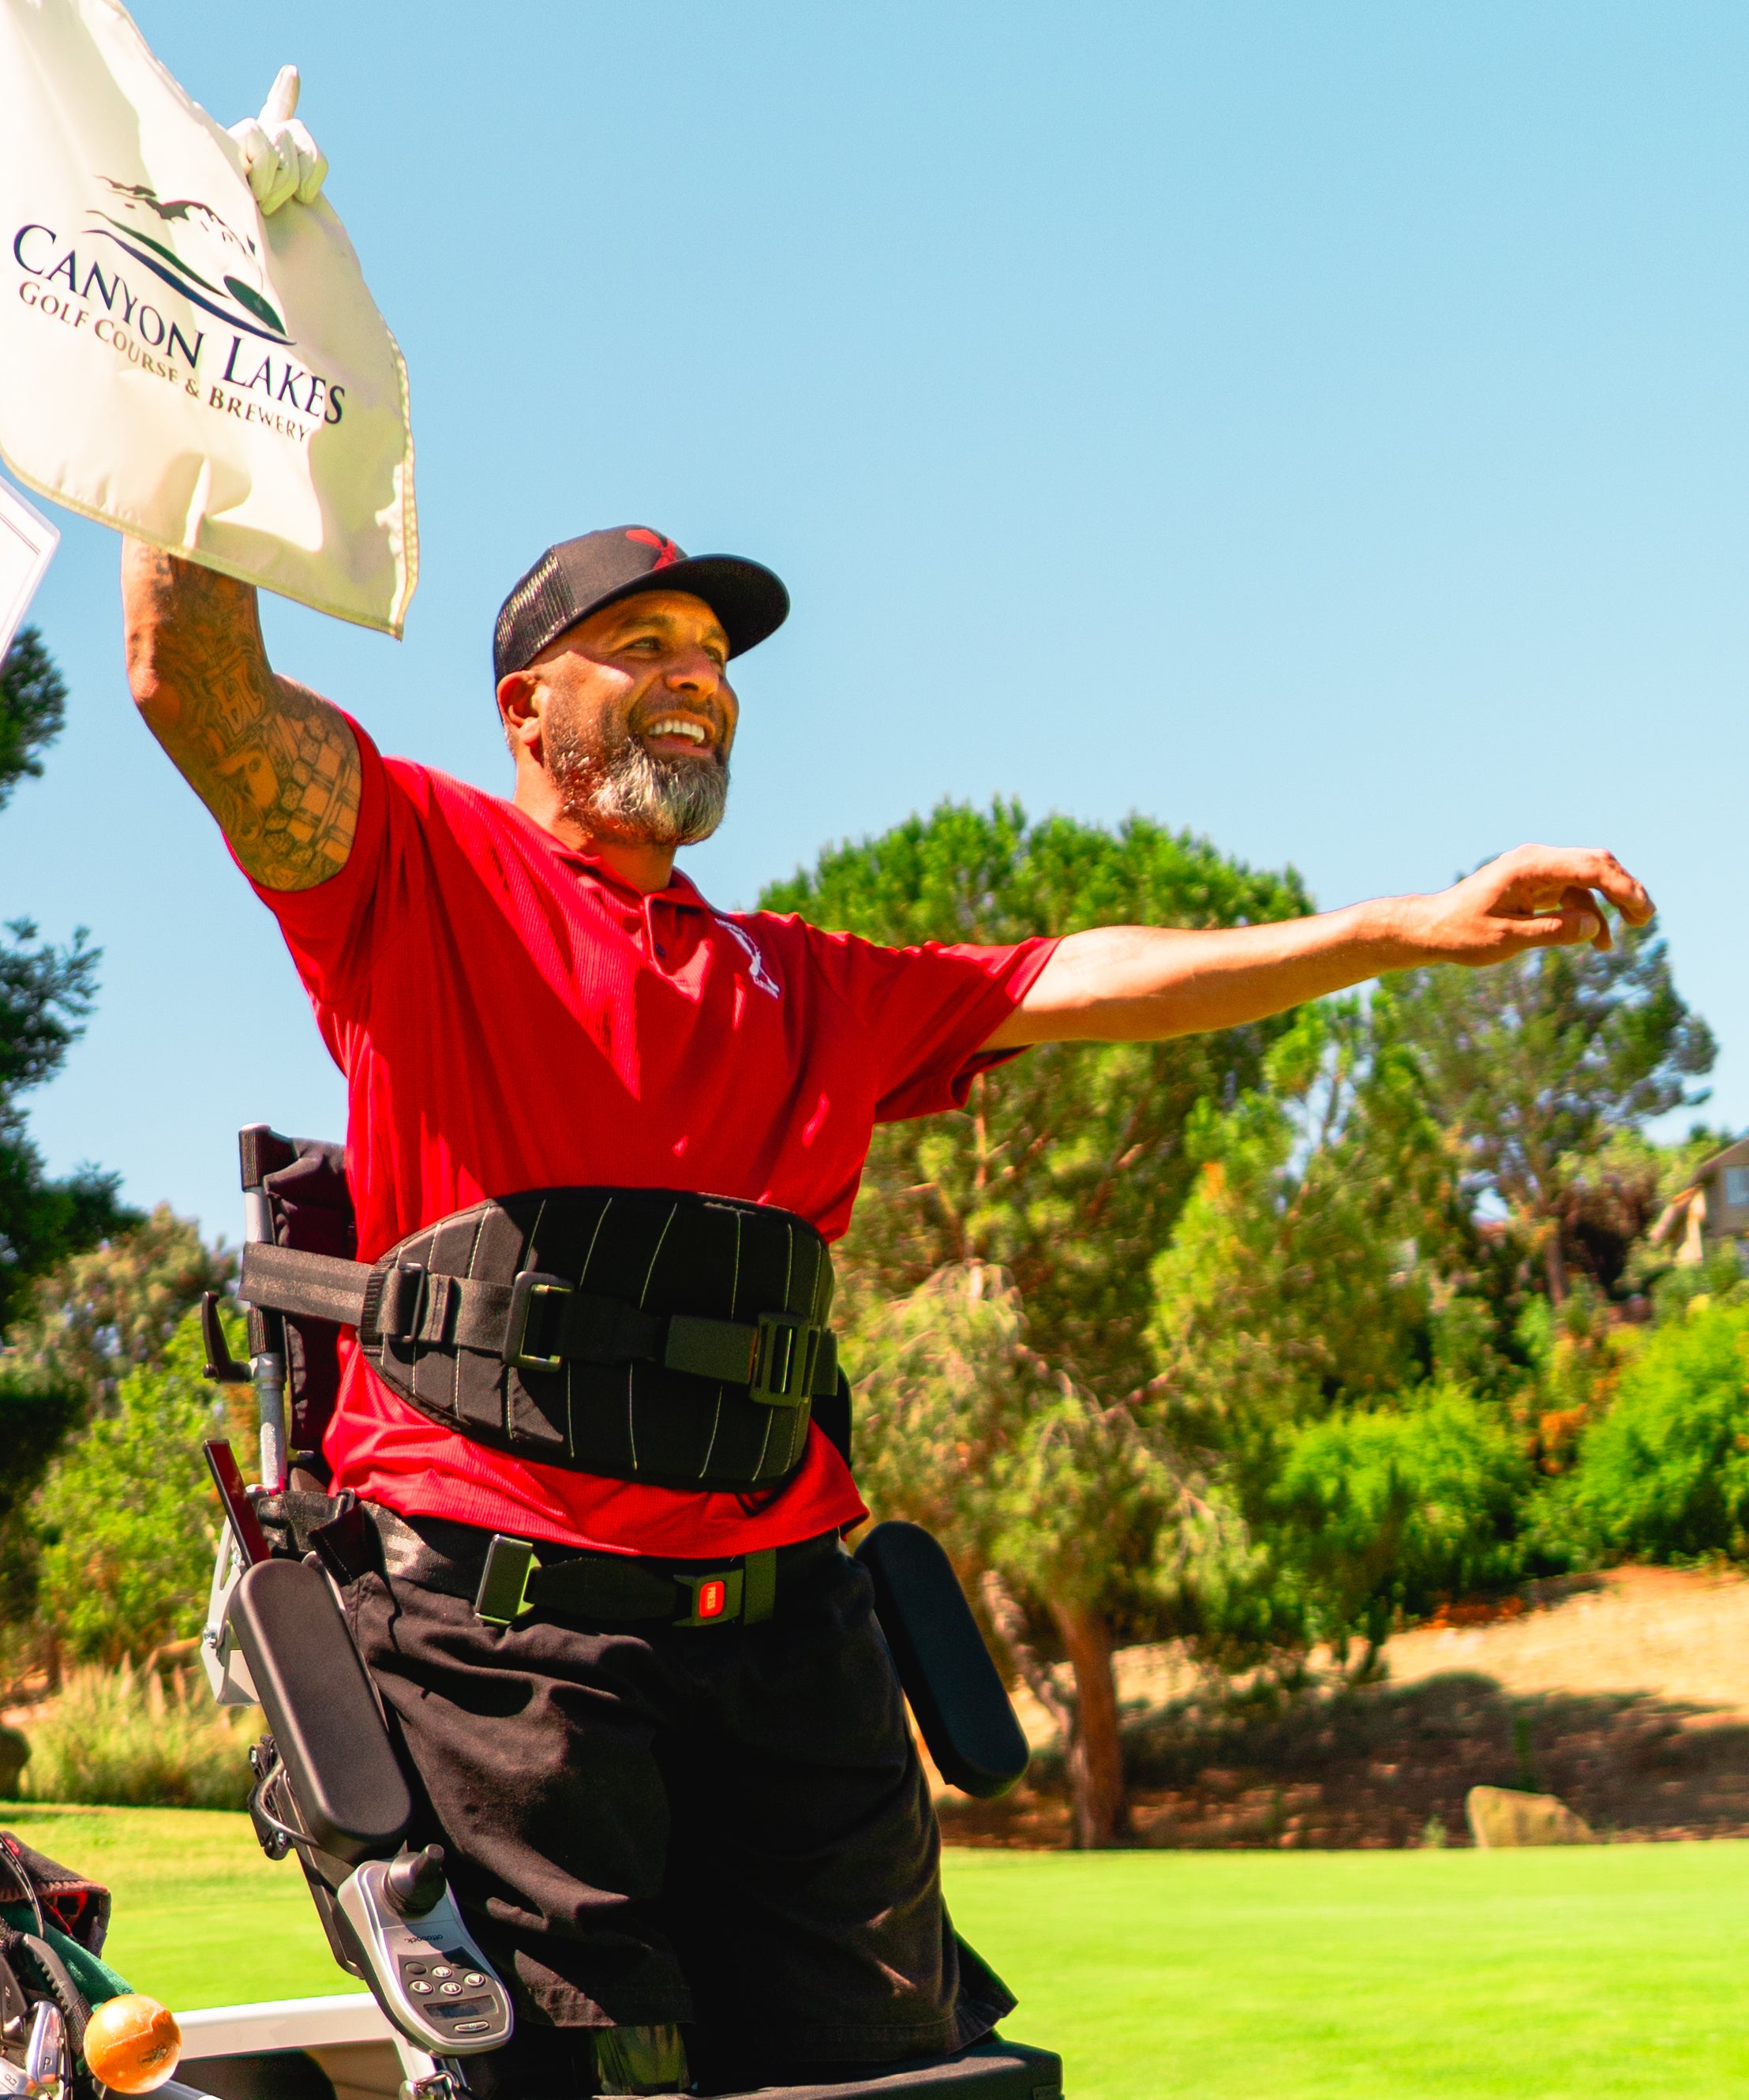 Candid photo of Amplife® Foundation & Amplife® Founder Abdul Nevarez celebrating and holding the flag on his 1st one-armed hole-in-one as a right above knee amputee with severe nerve damage in his left arm and left leg in an adaptive golf cart at Canyon Lakes 5th